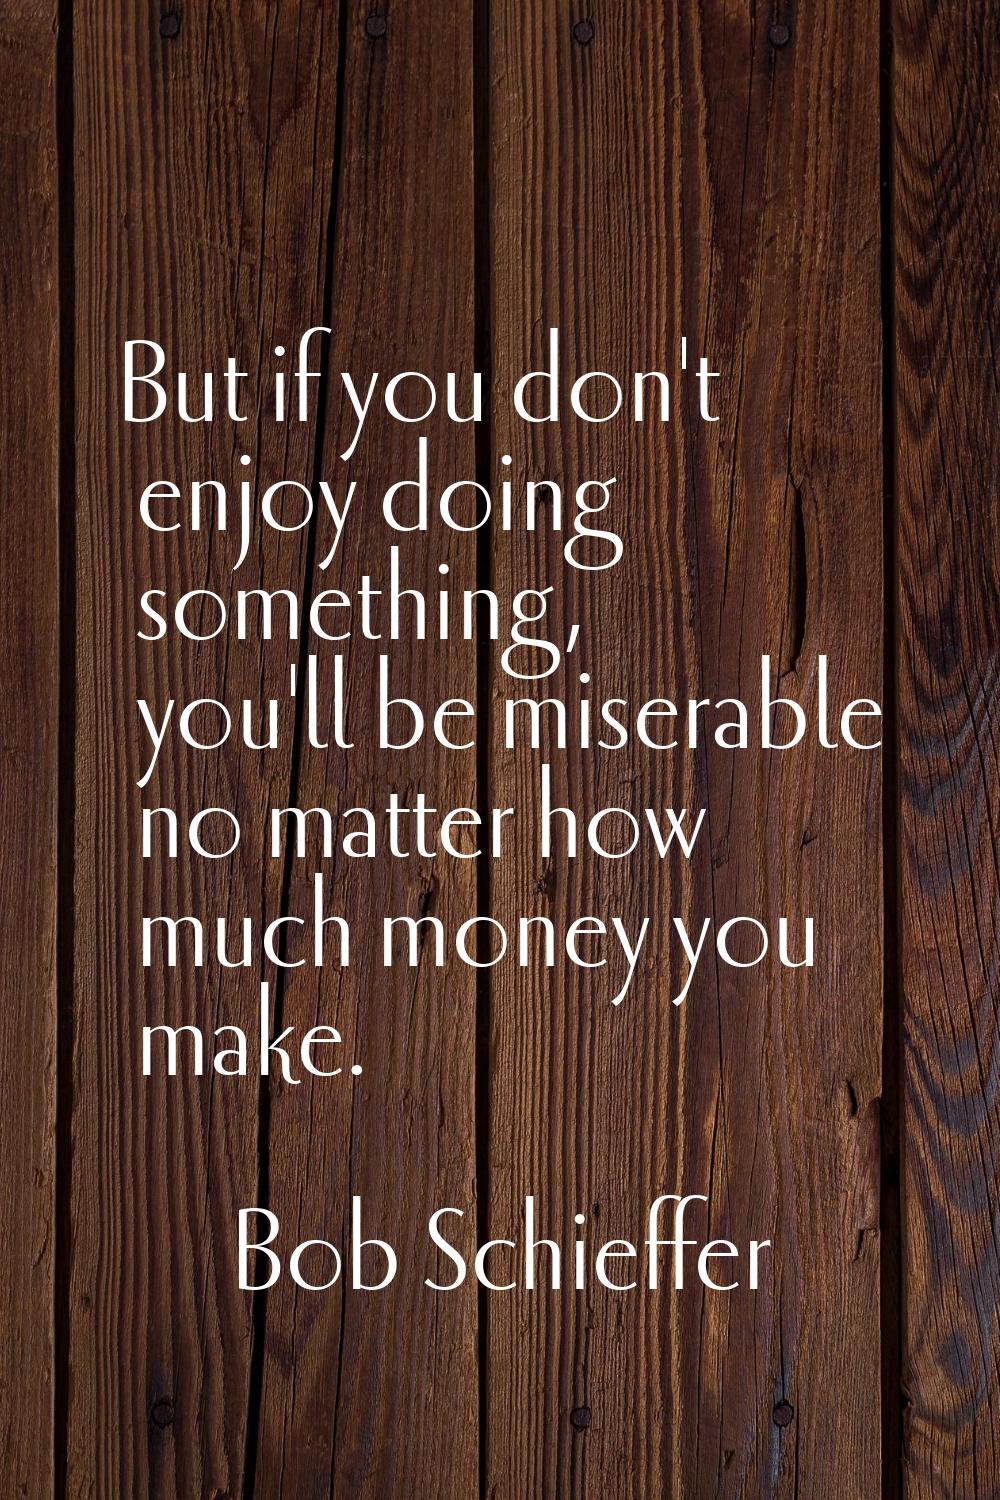 But if you don't enjoy doing something, you'll be miserable no matter how much money you make.